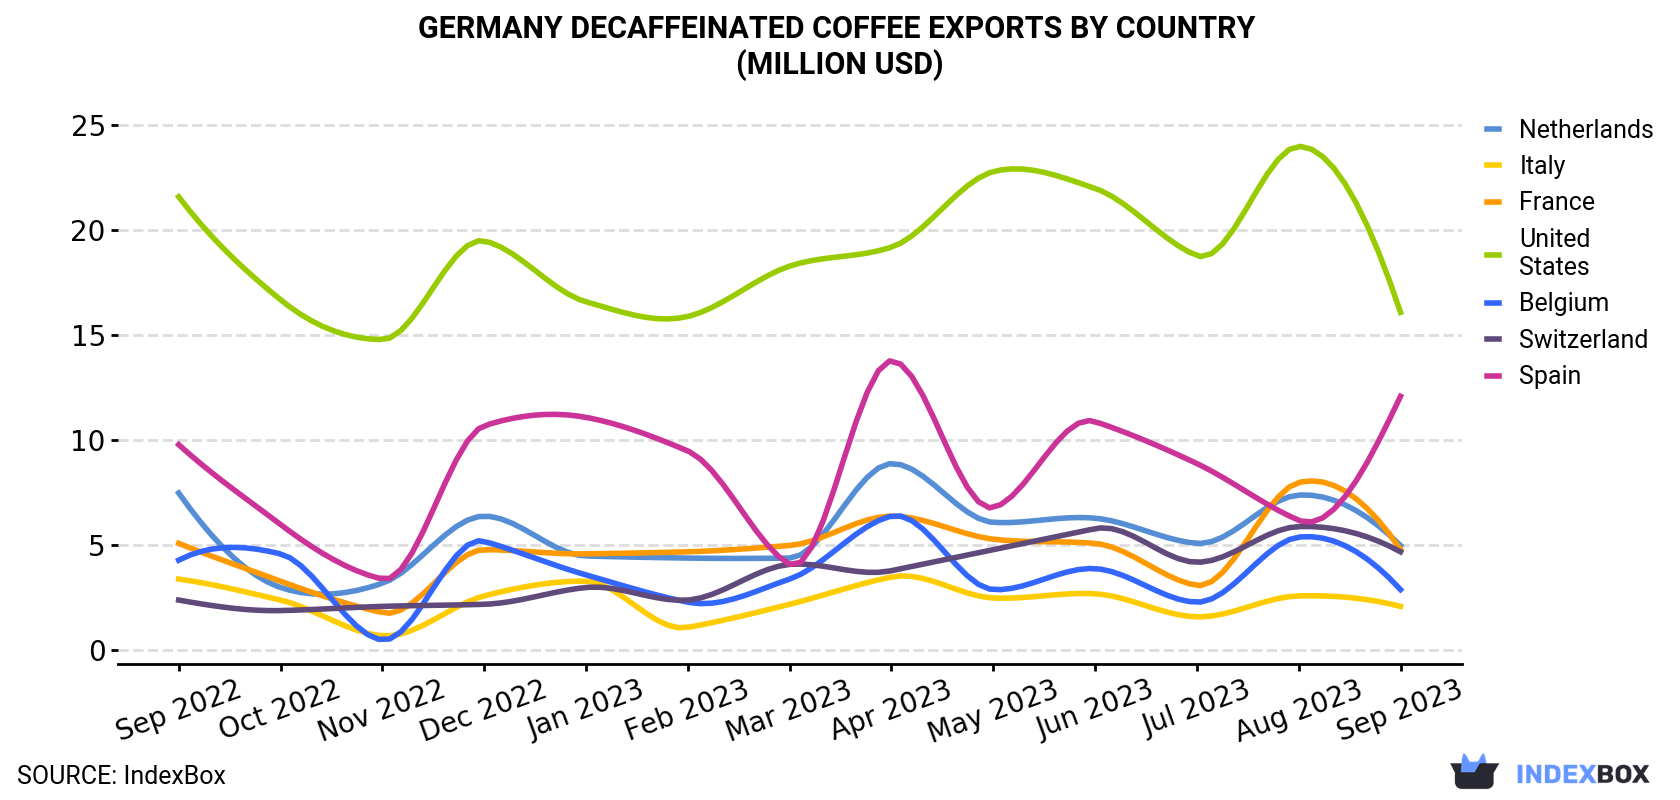 Germany Decaffeinated Coffee Exports By Country (Million USD)